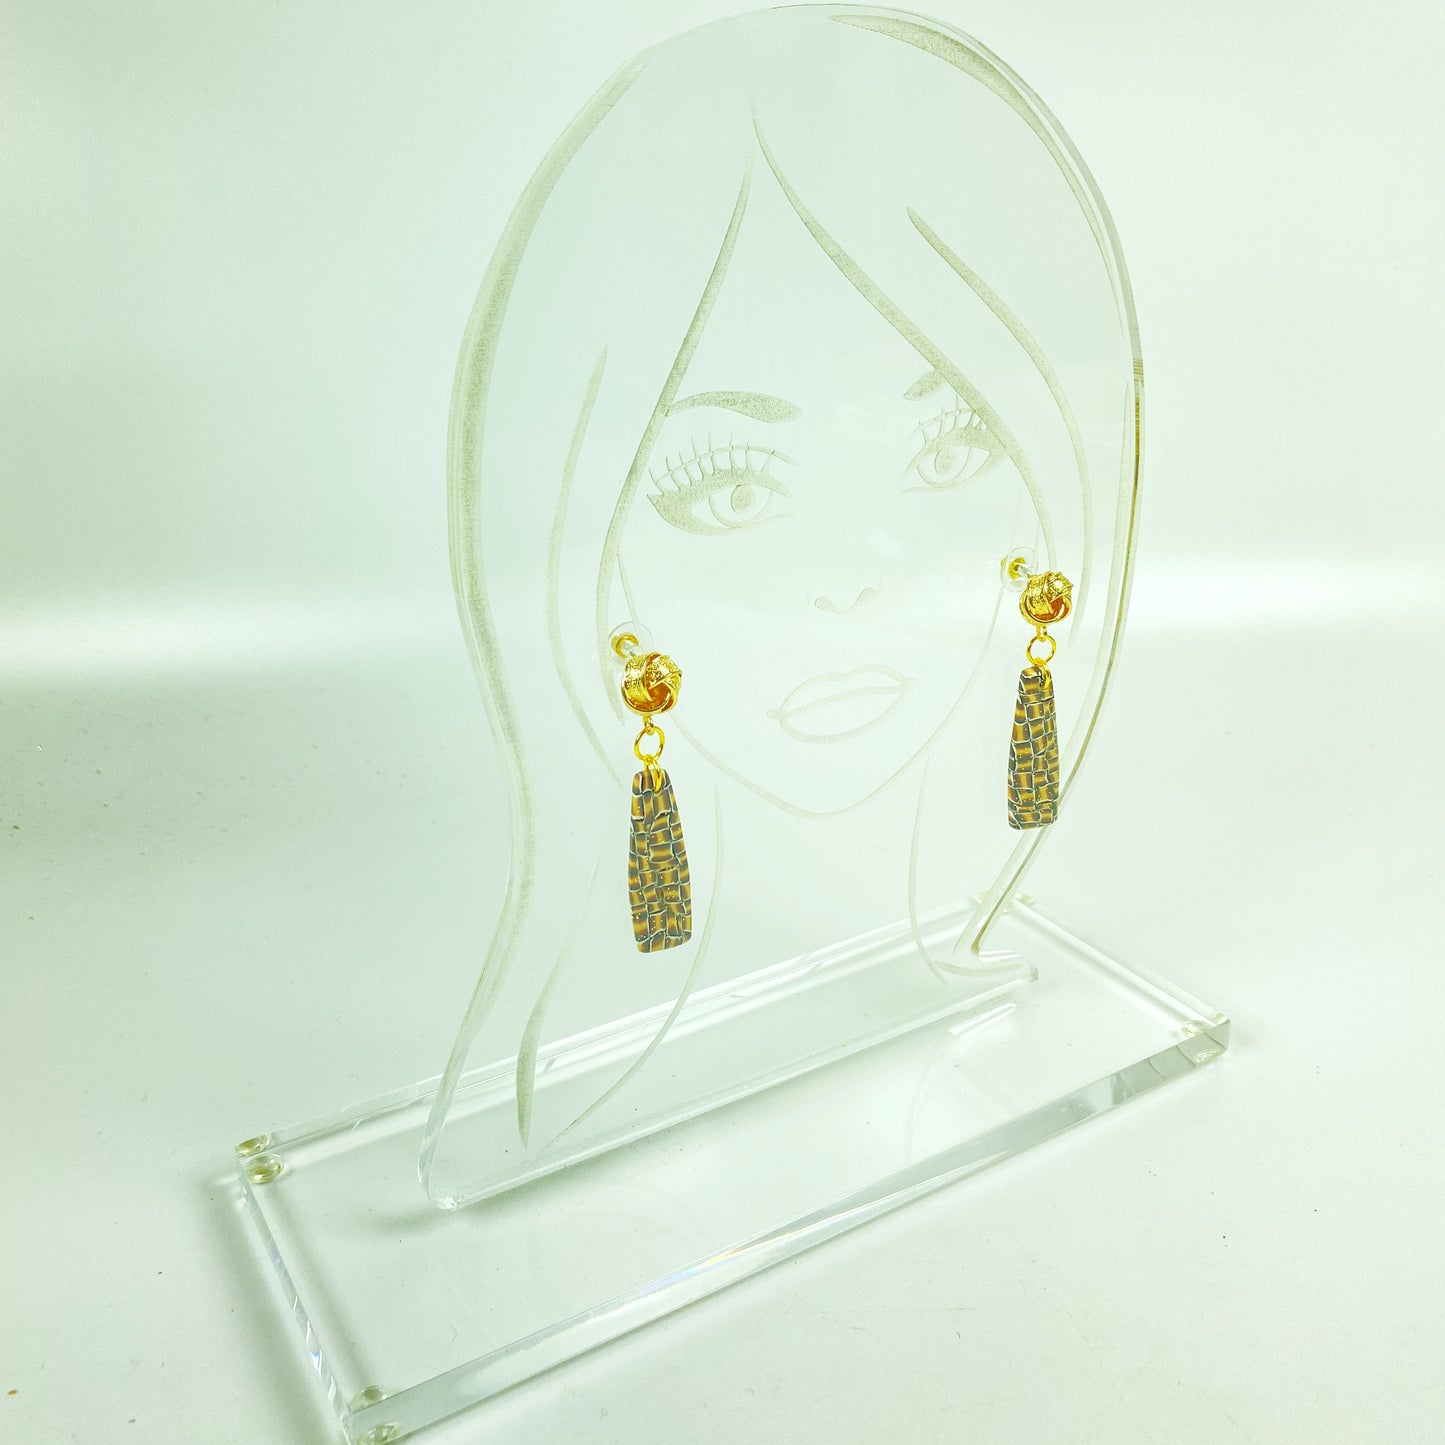 On a clear acrylic display stand